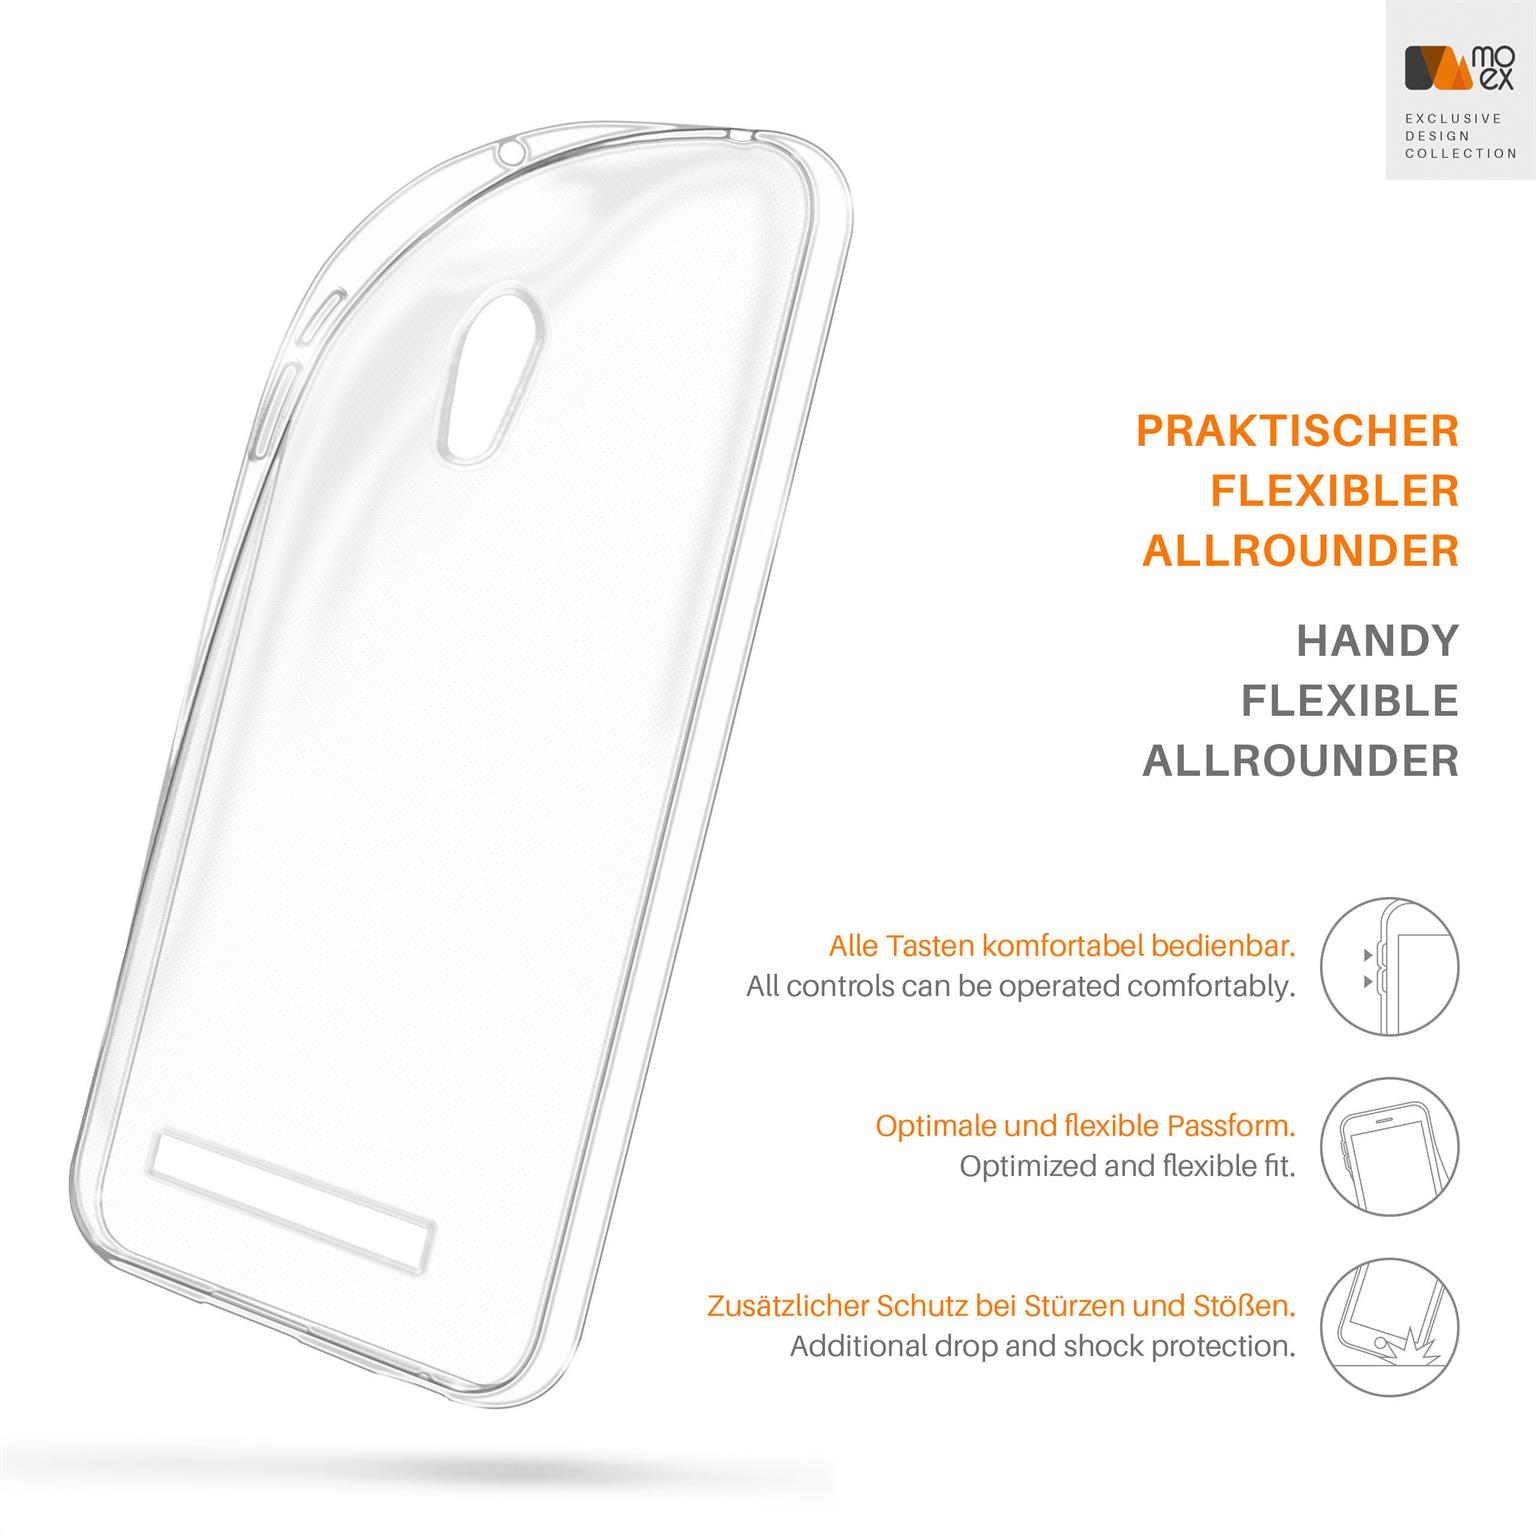 (2014), 5 Aero Backcover, ASUS, MOEX Zenfone Asus Crystal-Clear Case,